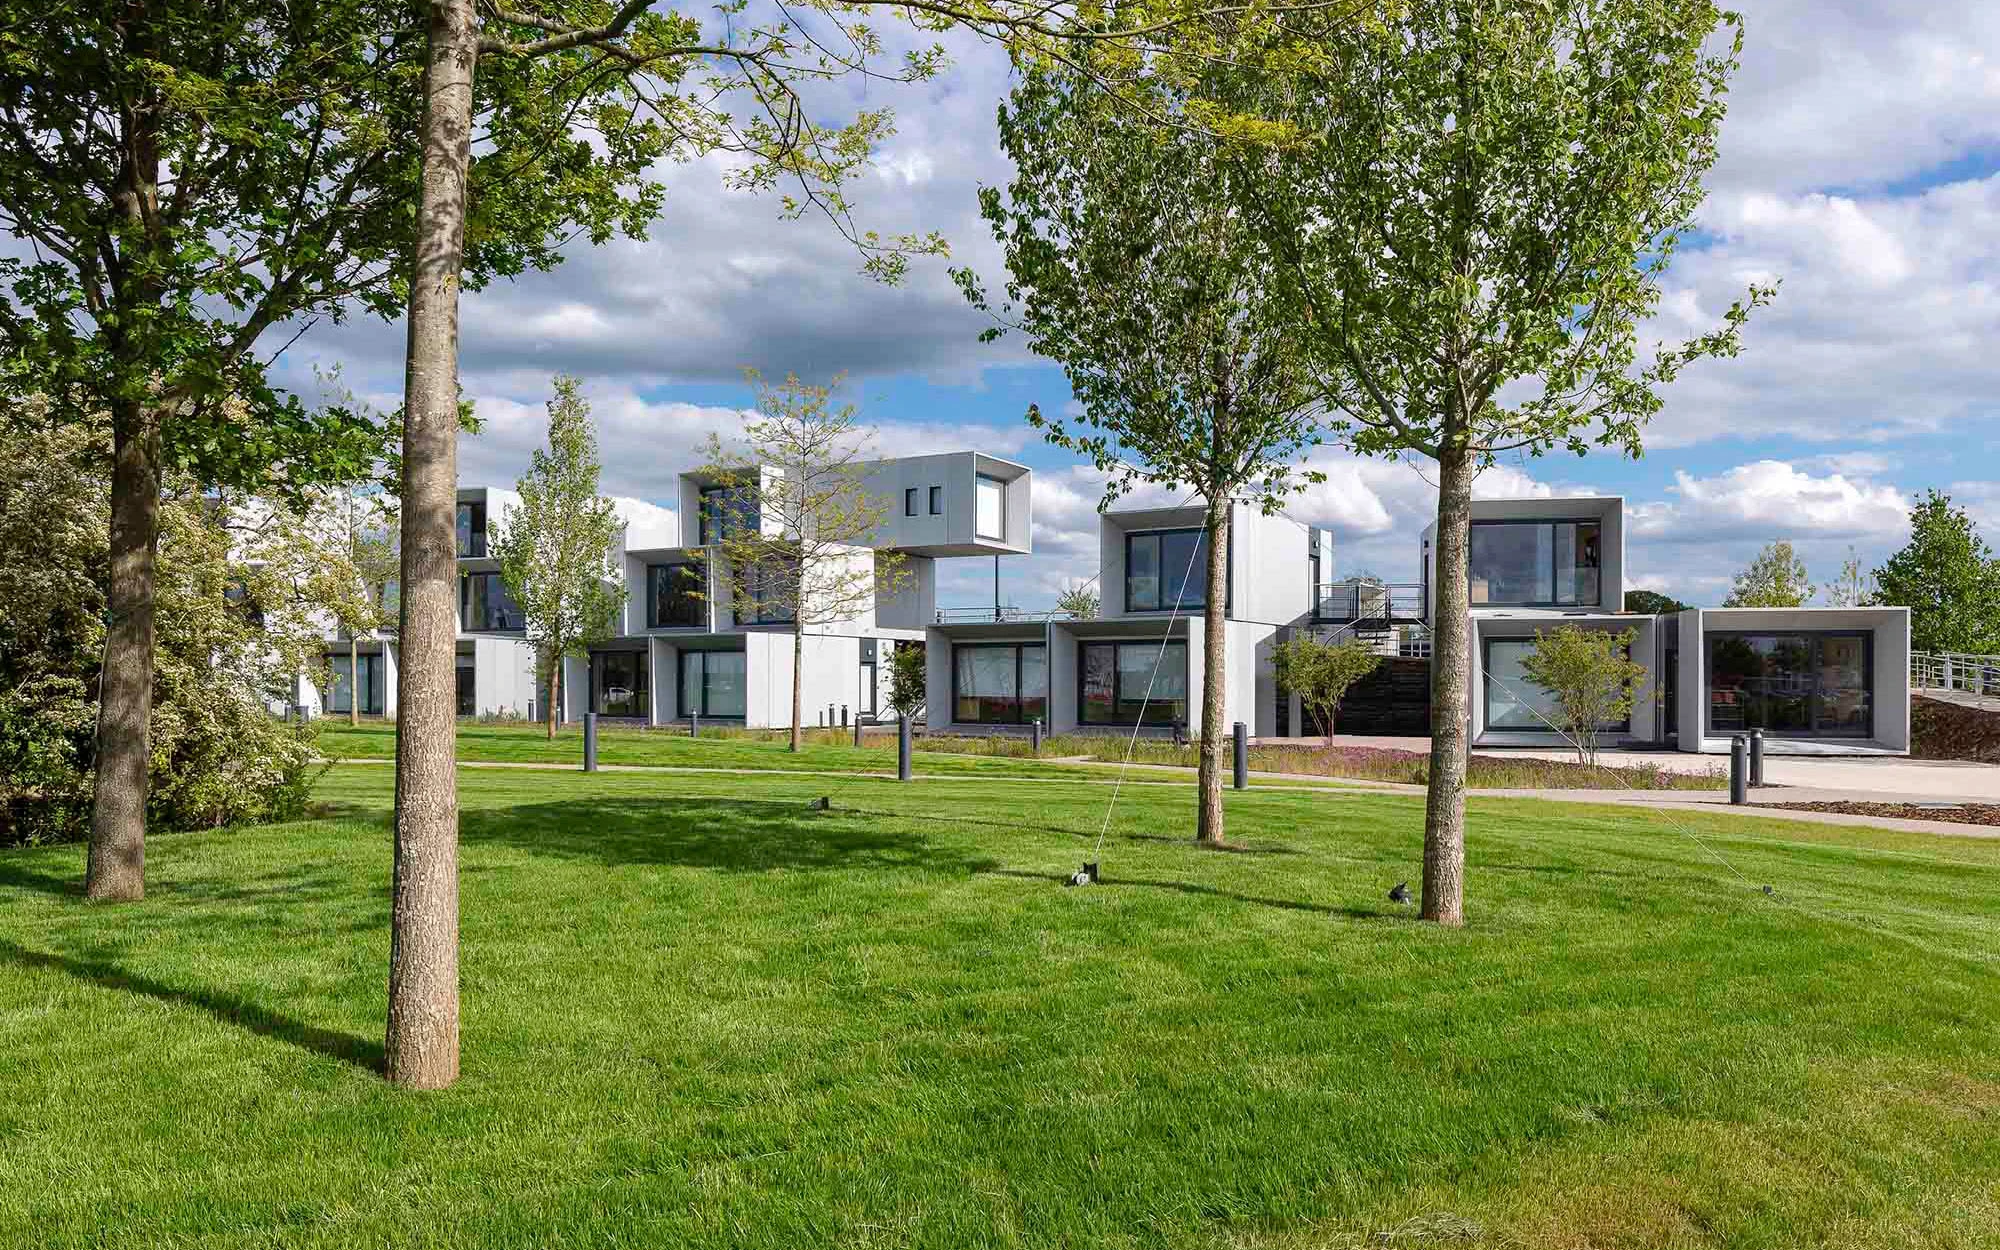 Housing at the Dyson Institute of Engineering and Technology